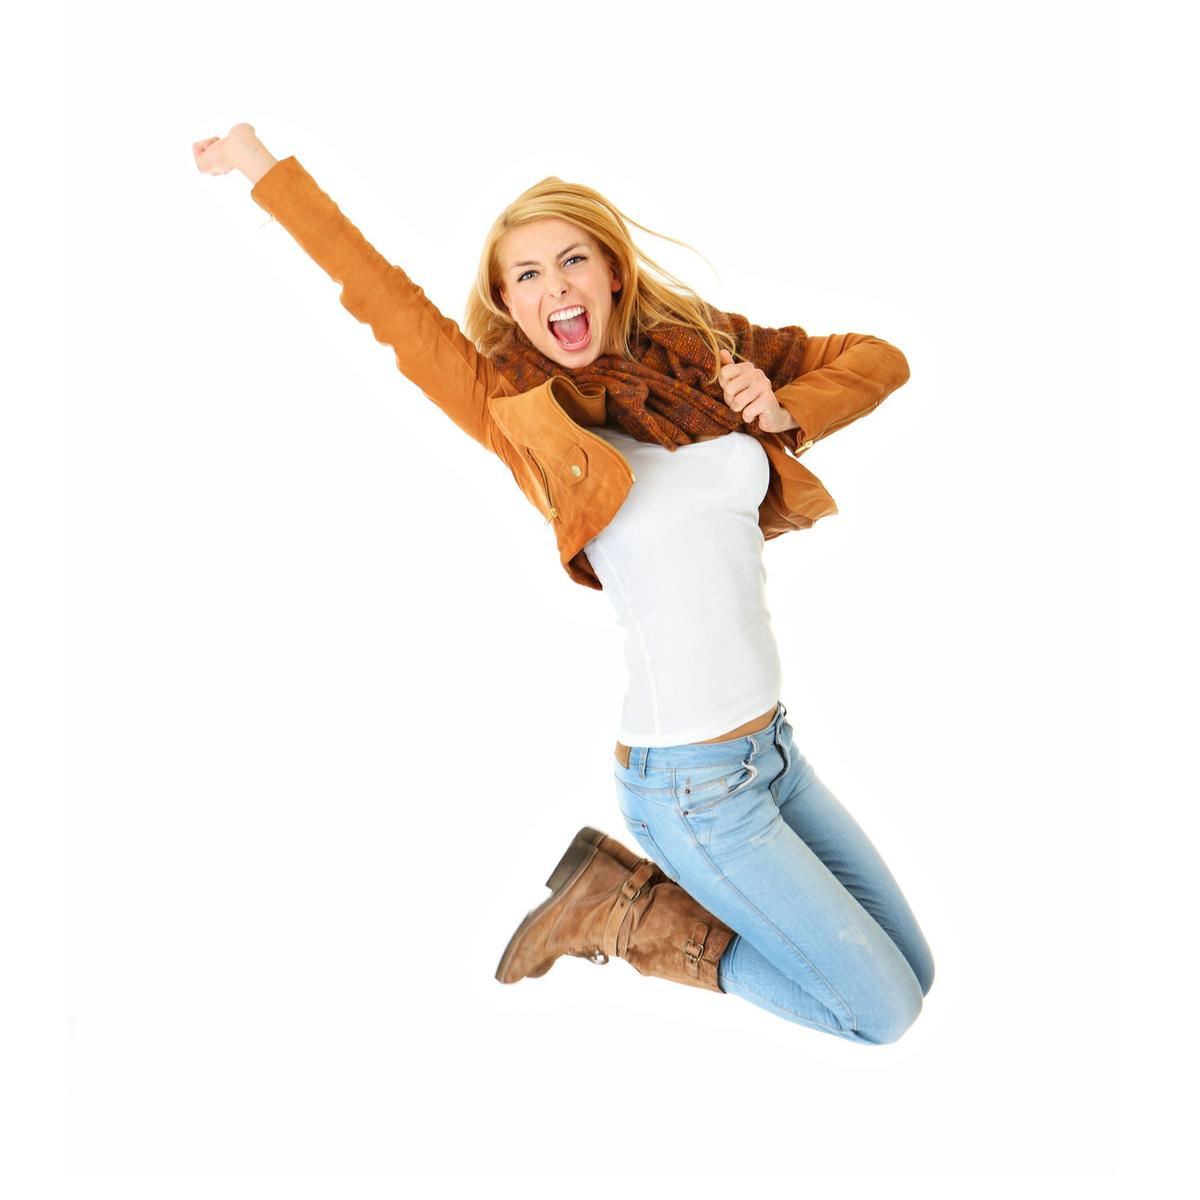 A picture of a young happy woman jumping with joy over white background